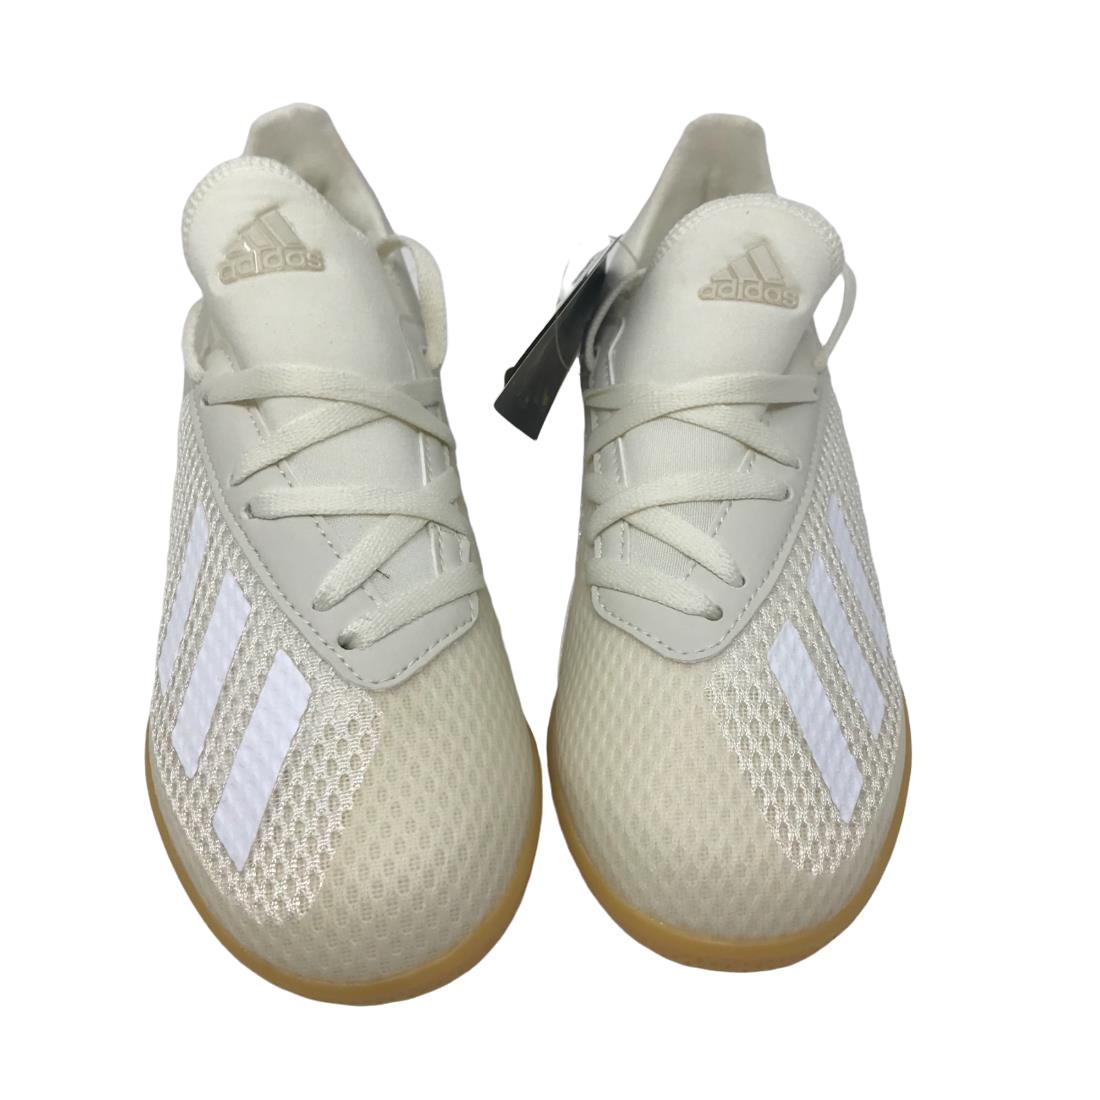 Adidas Unisex Kids Tango Indoor Soccer Shoe Size 1Y - Off White/Gold